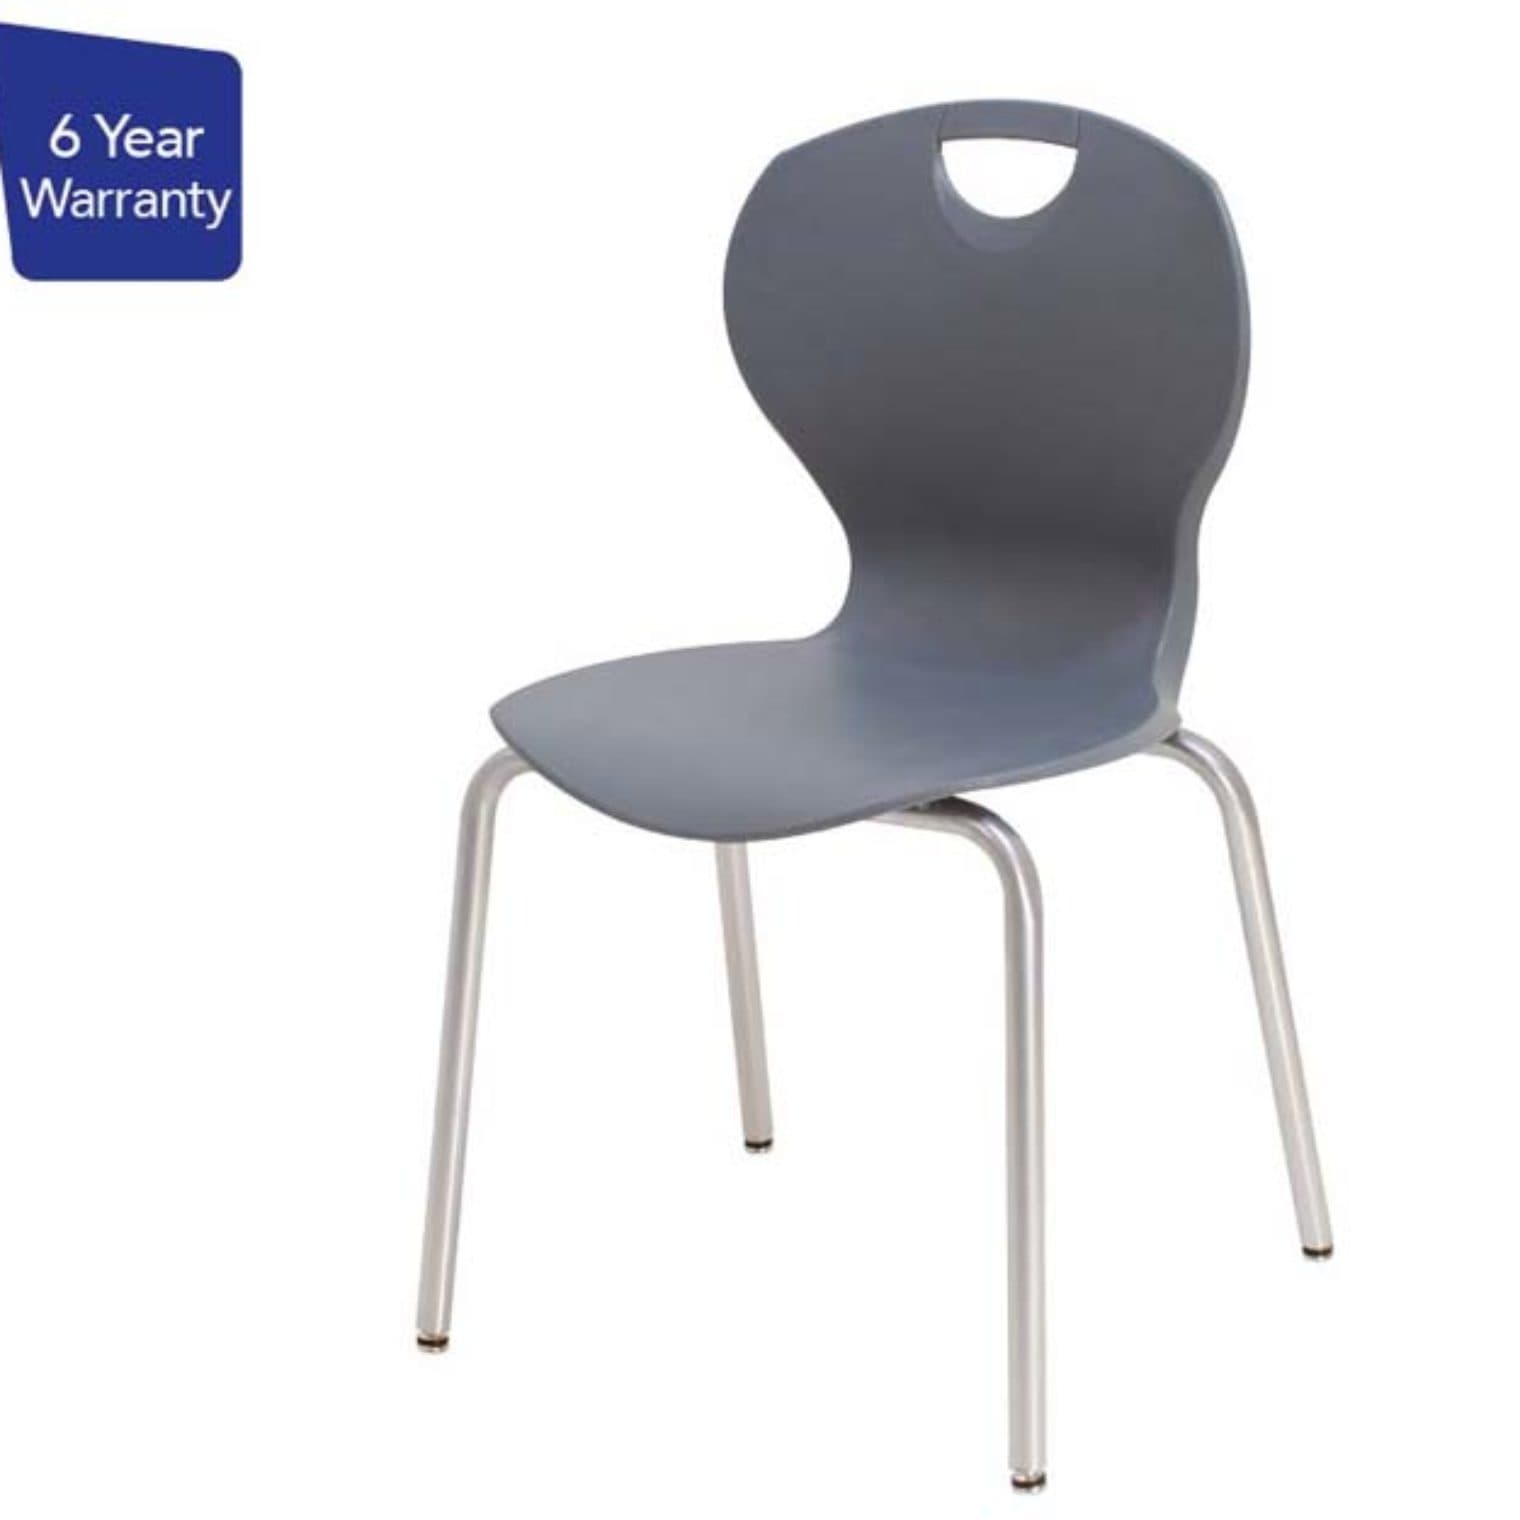 The Profile Chair